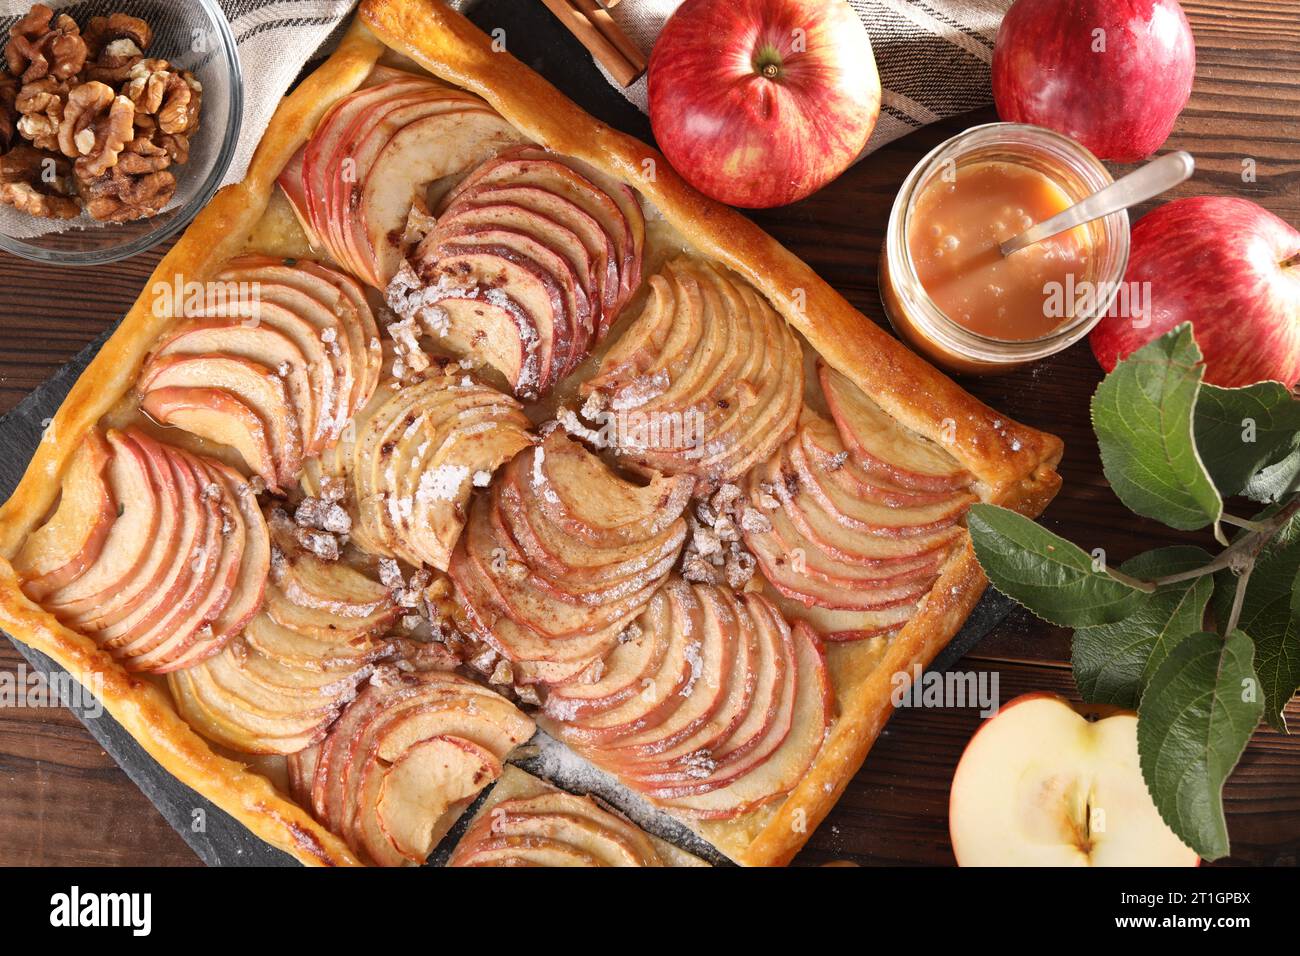 Freshly baked apple pie and ingredients on wooden table, flat lay Stock Photo